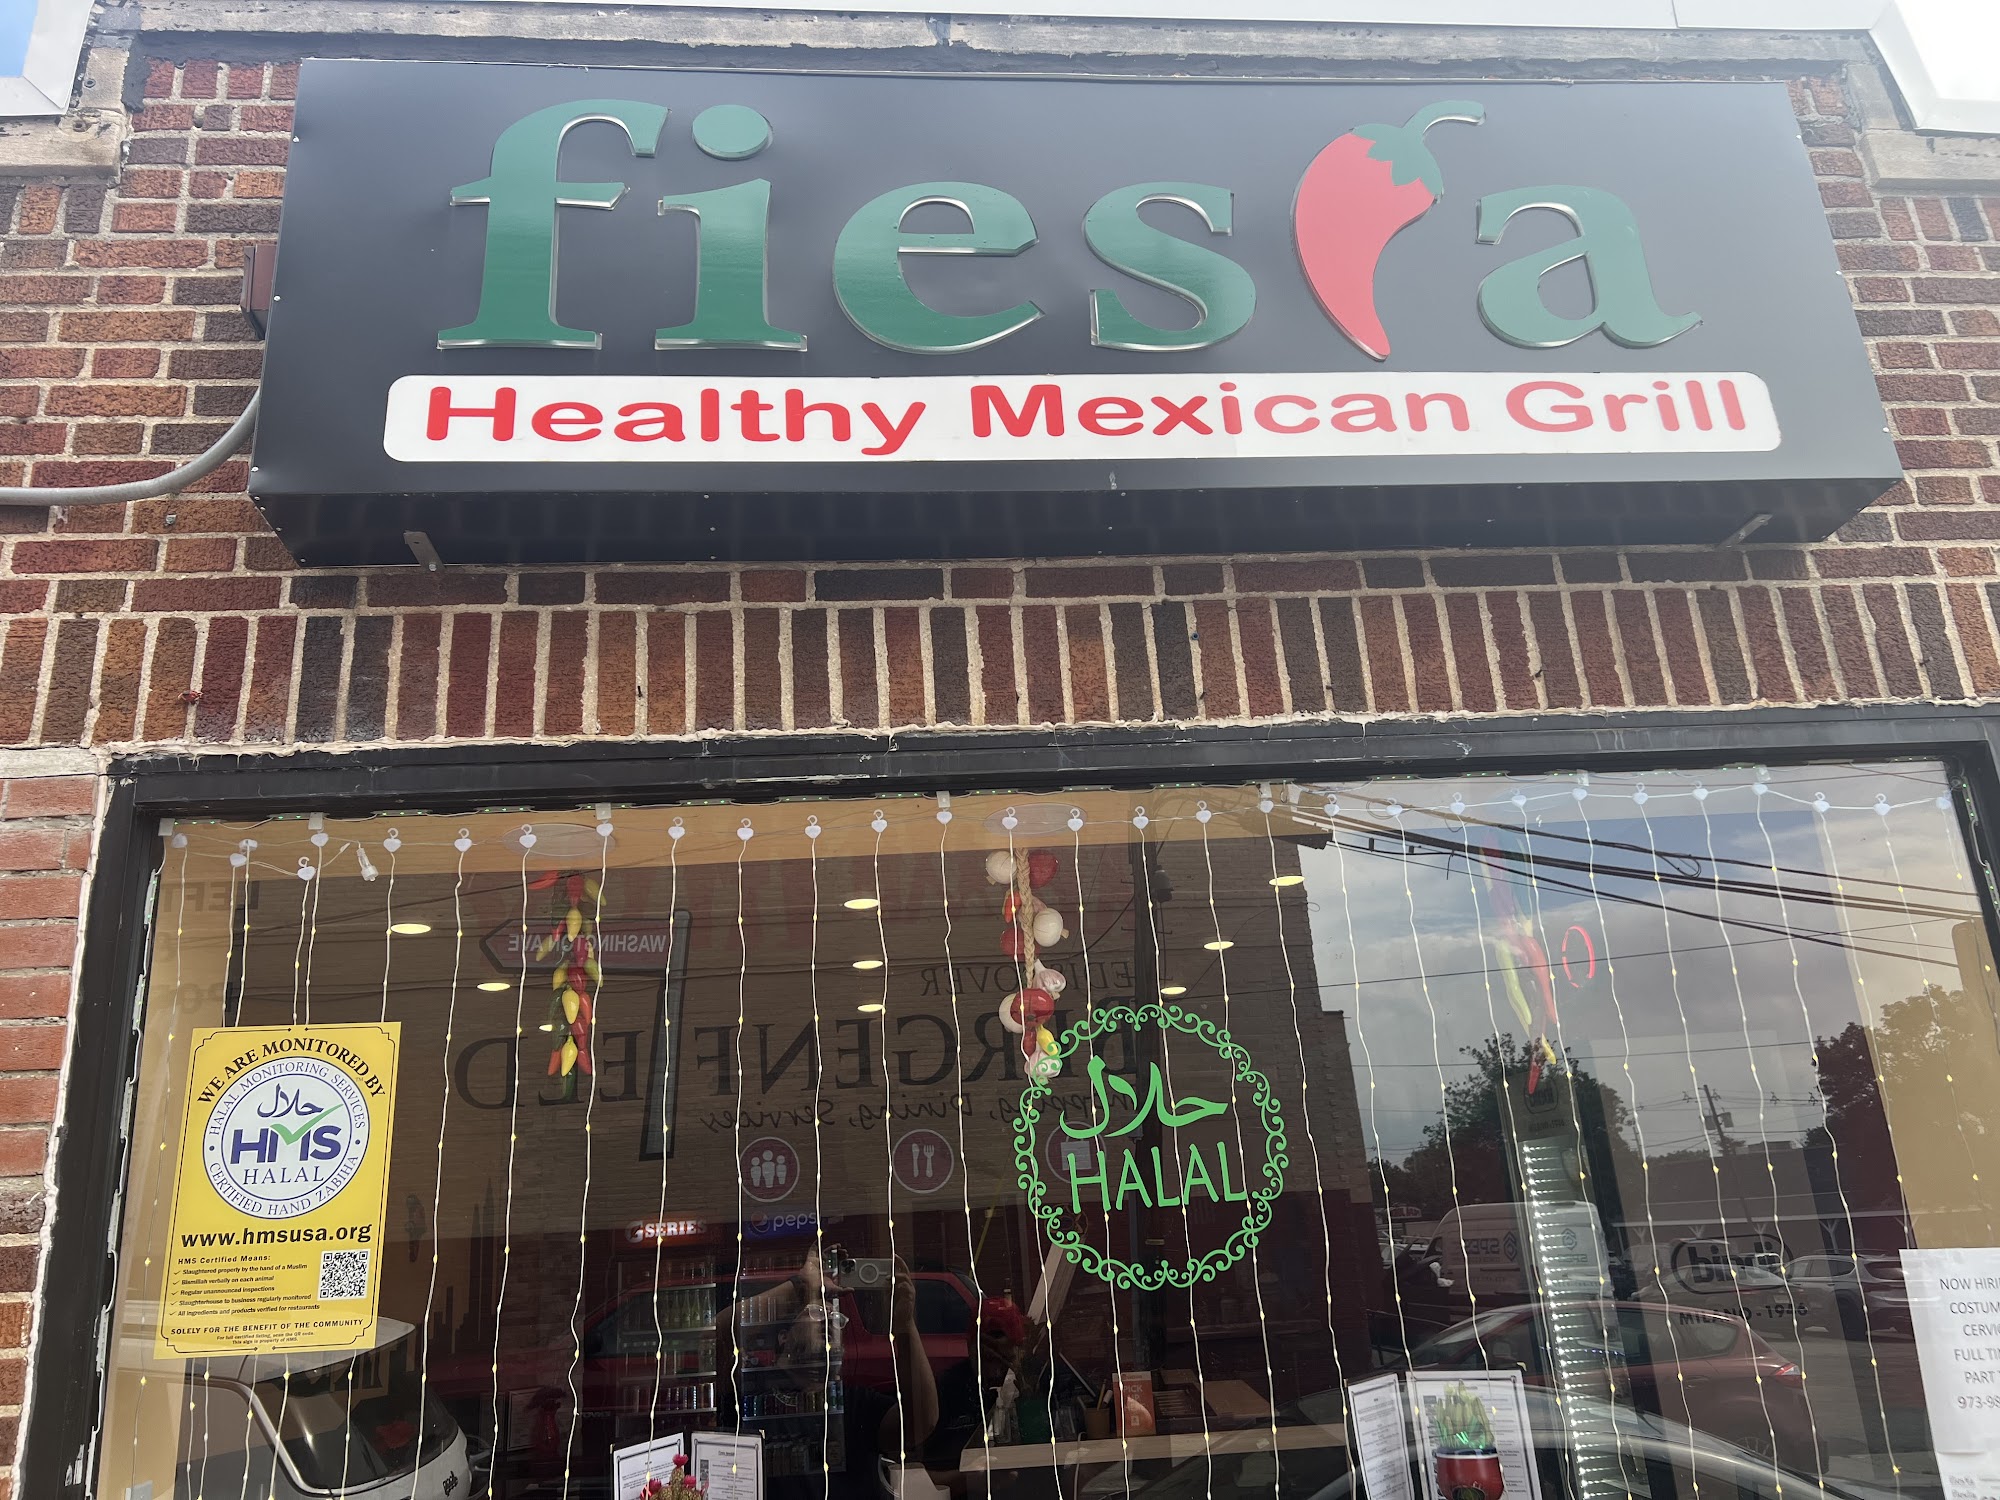 Fiesta Healthy Mexican Grill New Jersey